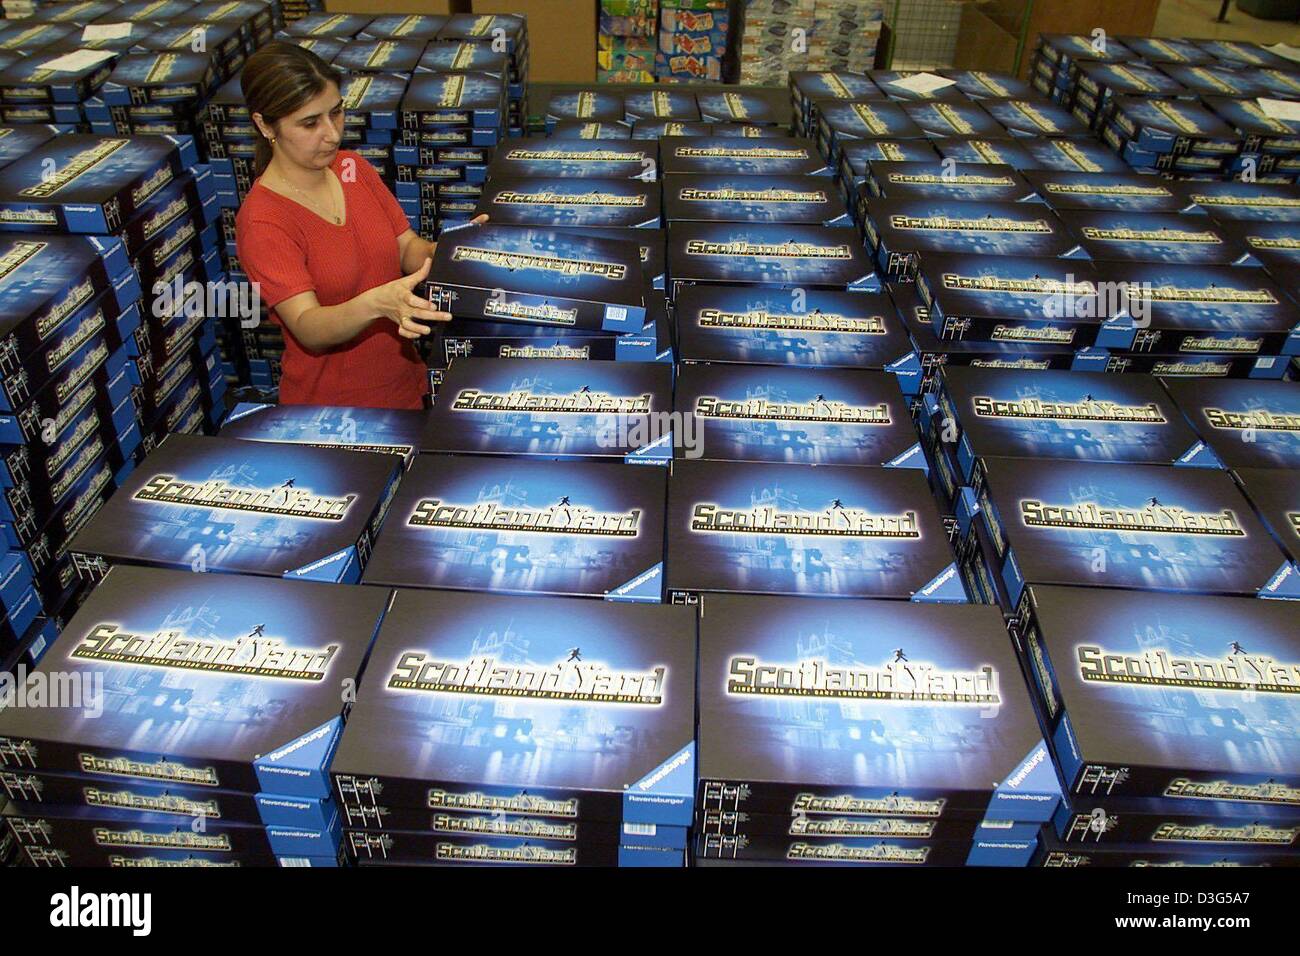 (dpa files) - An employee of the toy maker Ravensburger stacks boxes of the board game Scotland Yard in Ravensburg, Germany, 3 July 2001. Board games, electric model railways and puzzles are still among the favourite Christmas presents. Stock Photo